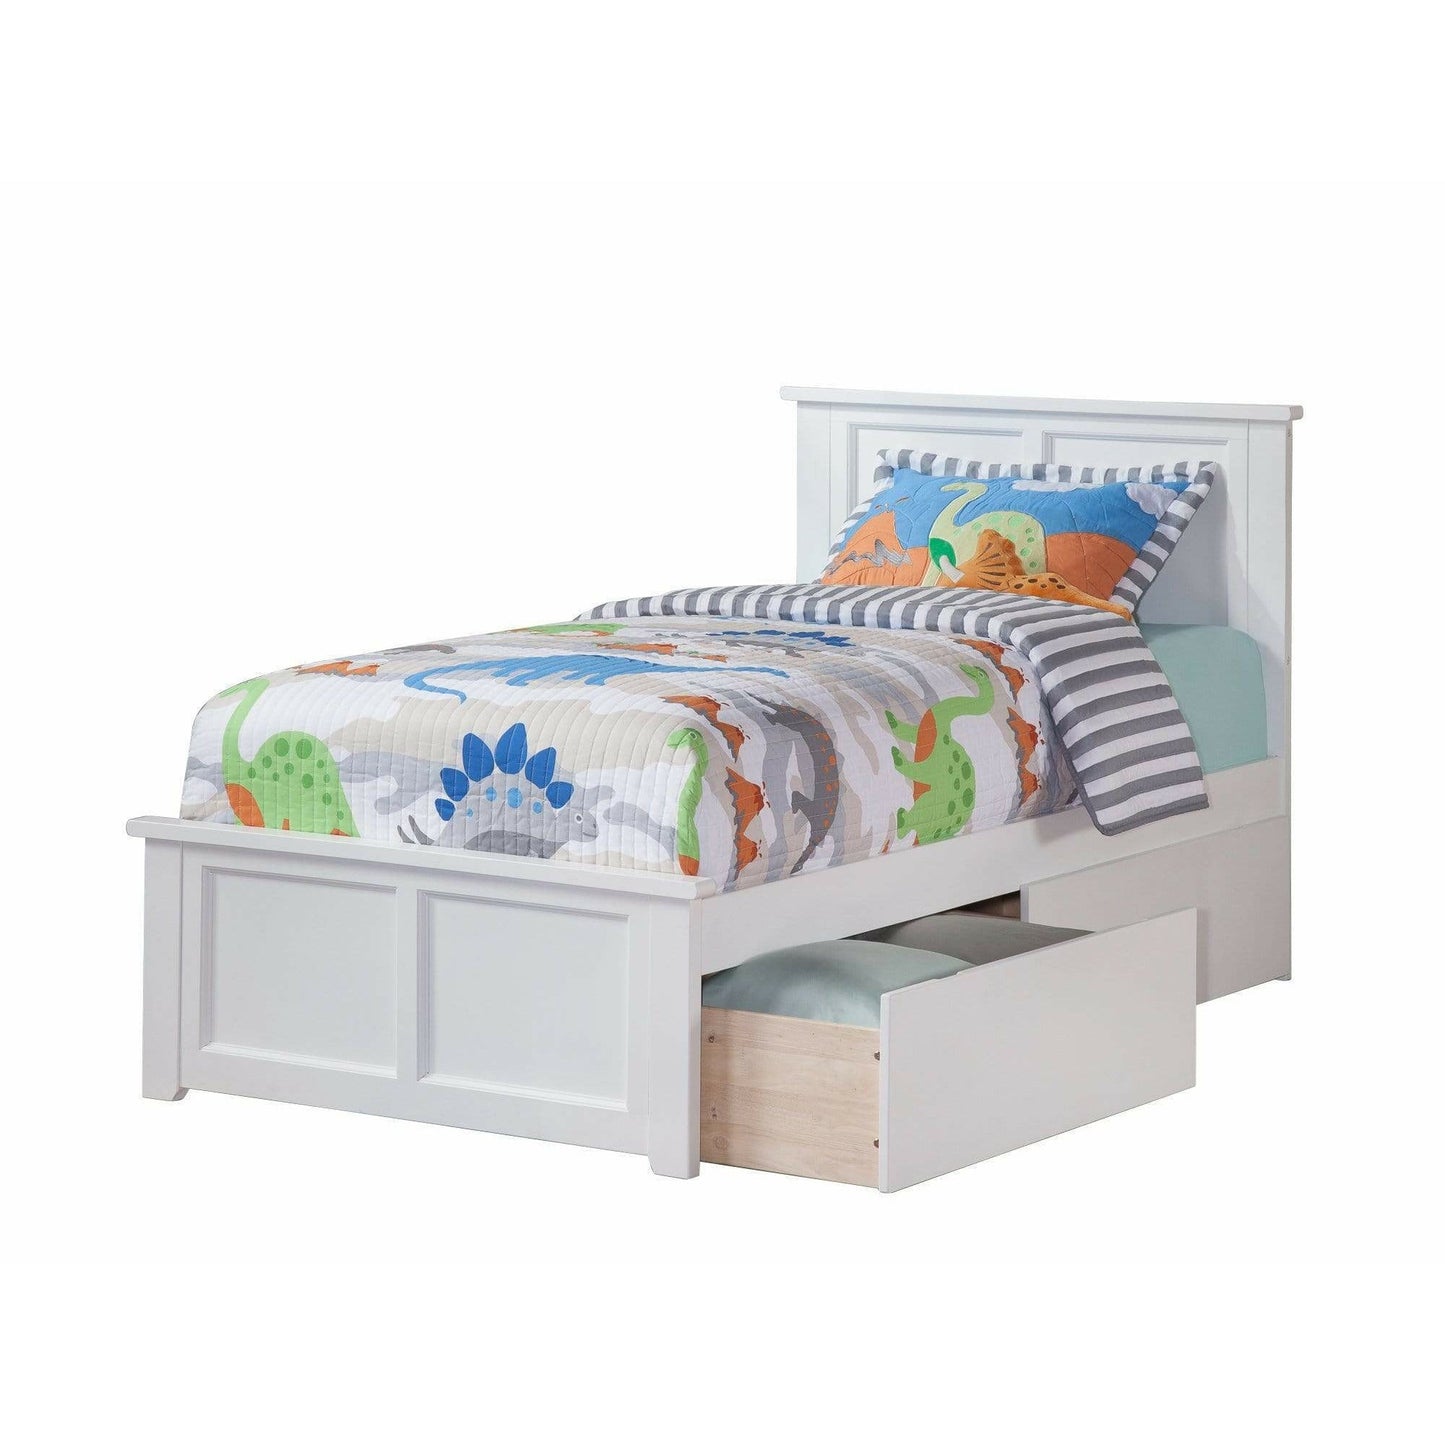 Atlantic Furniture Bed Madison Twin XL Platform Bed with Matching Foot Board with 2 Urban Bed Drawers in Espresso